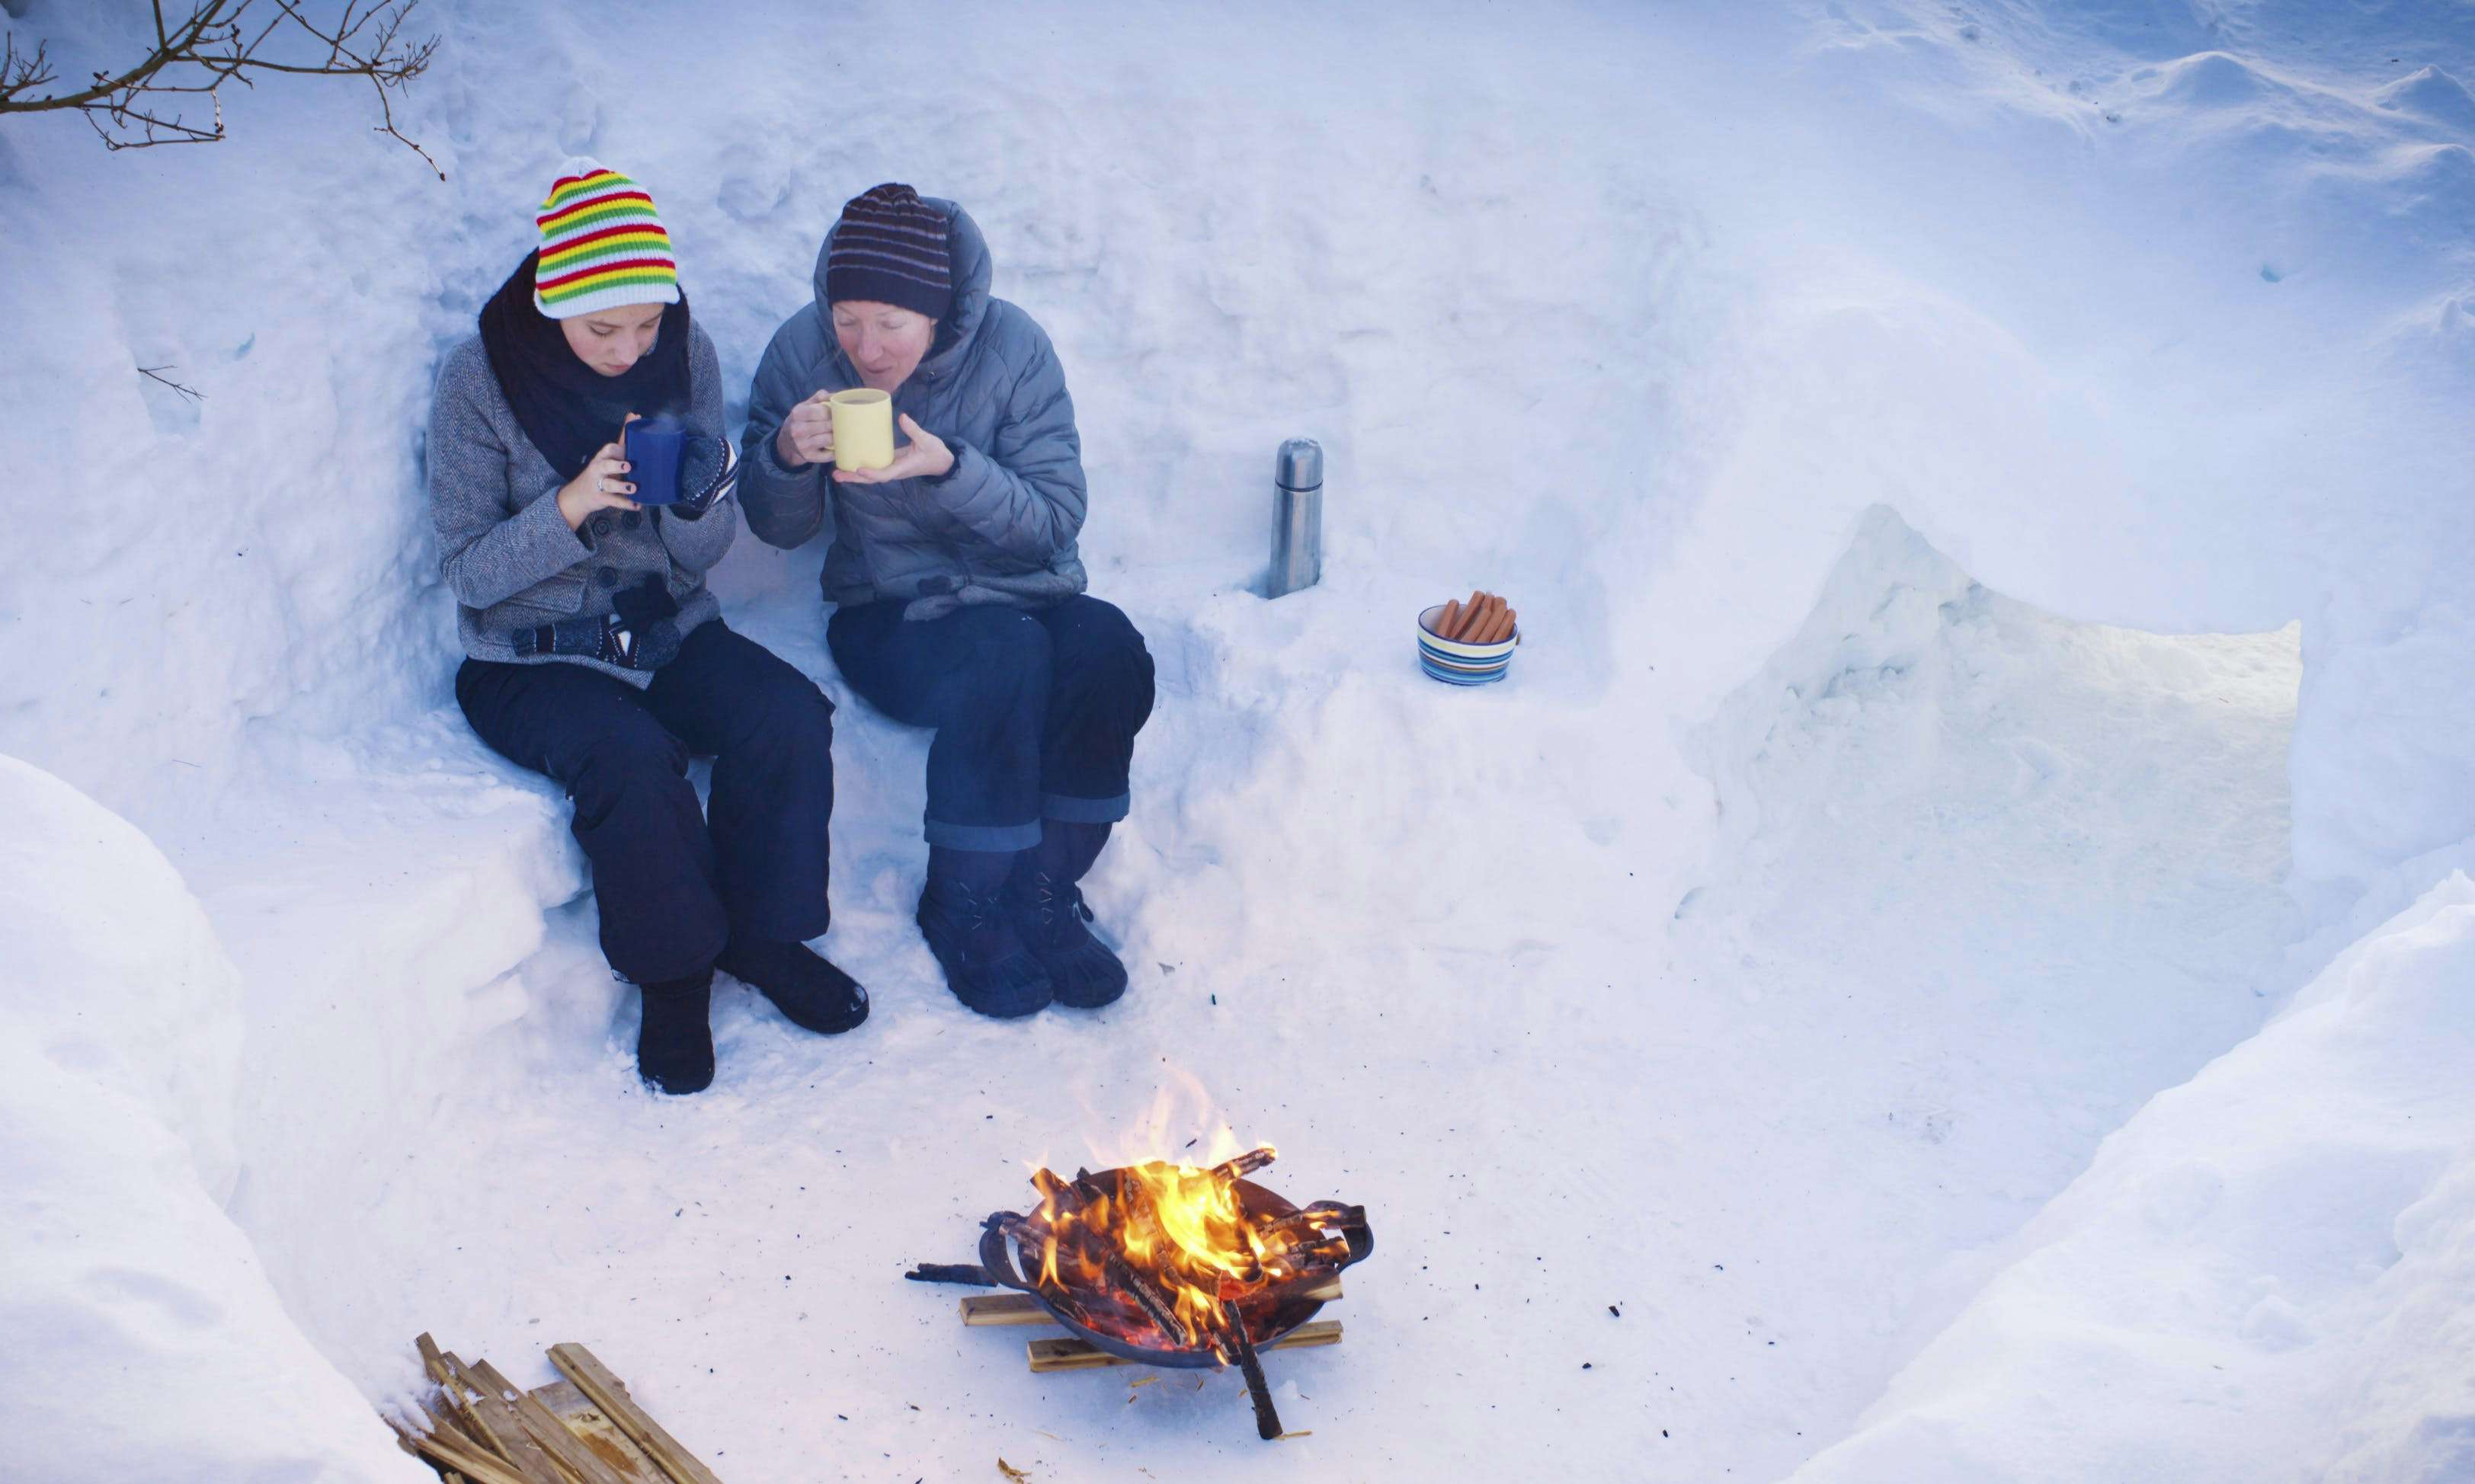 Two people sitting in the snow, sipping hot drinks with a Thermos nearby